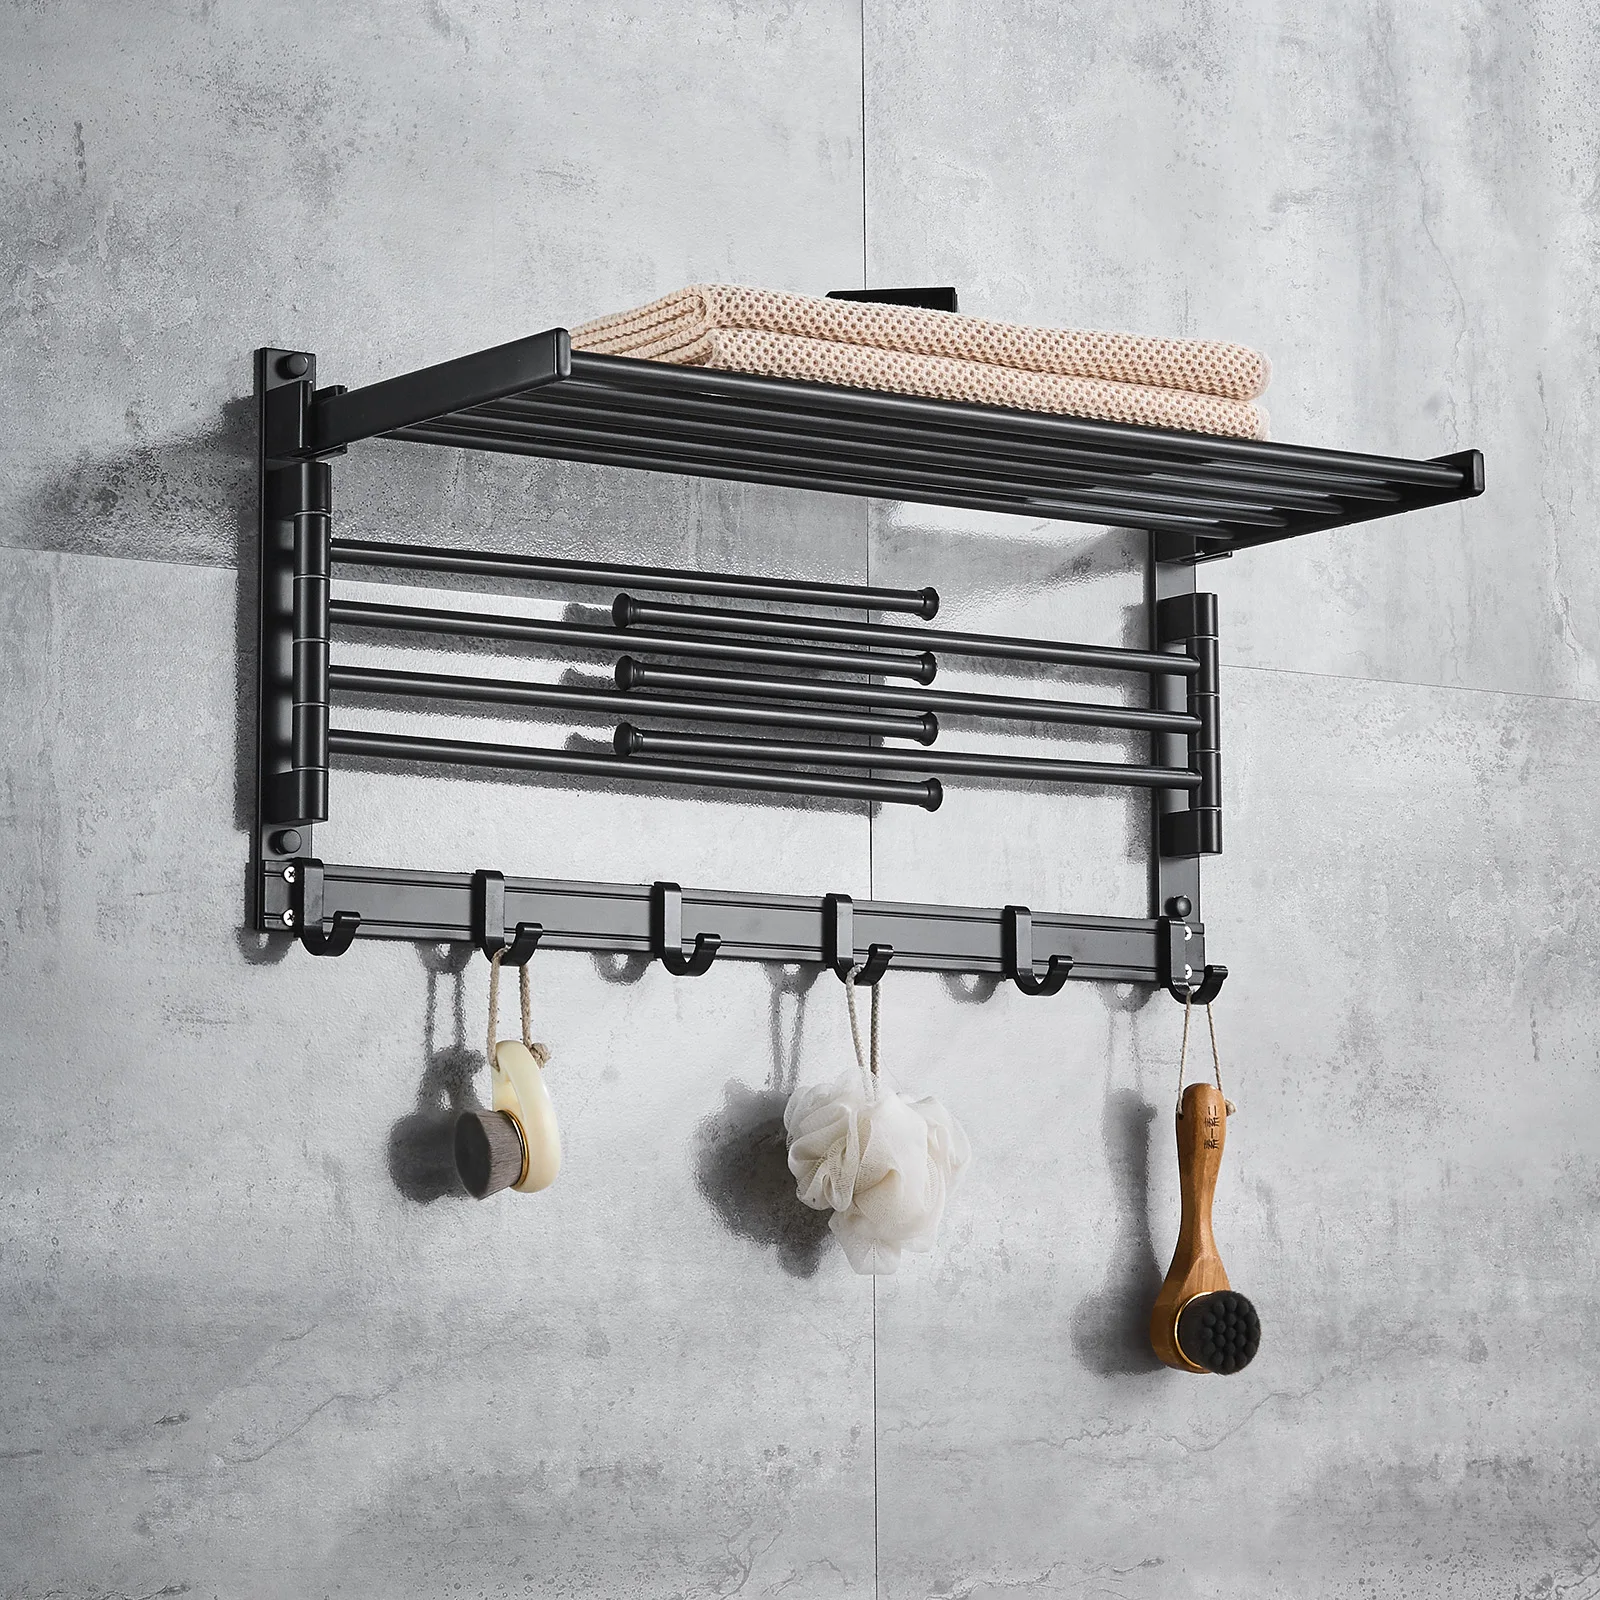 

Laundry Clothes Drying Rack - Wall Mounted Swivel Towel Rack with Hooks and Swing Arms Space Saver in Laundry Room and Bathroom